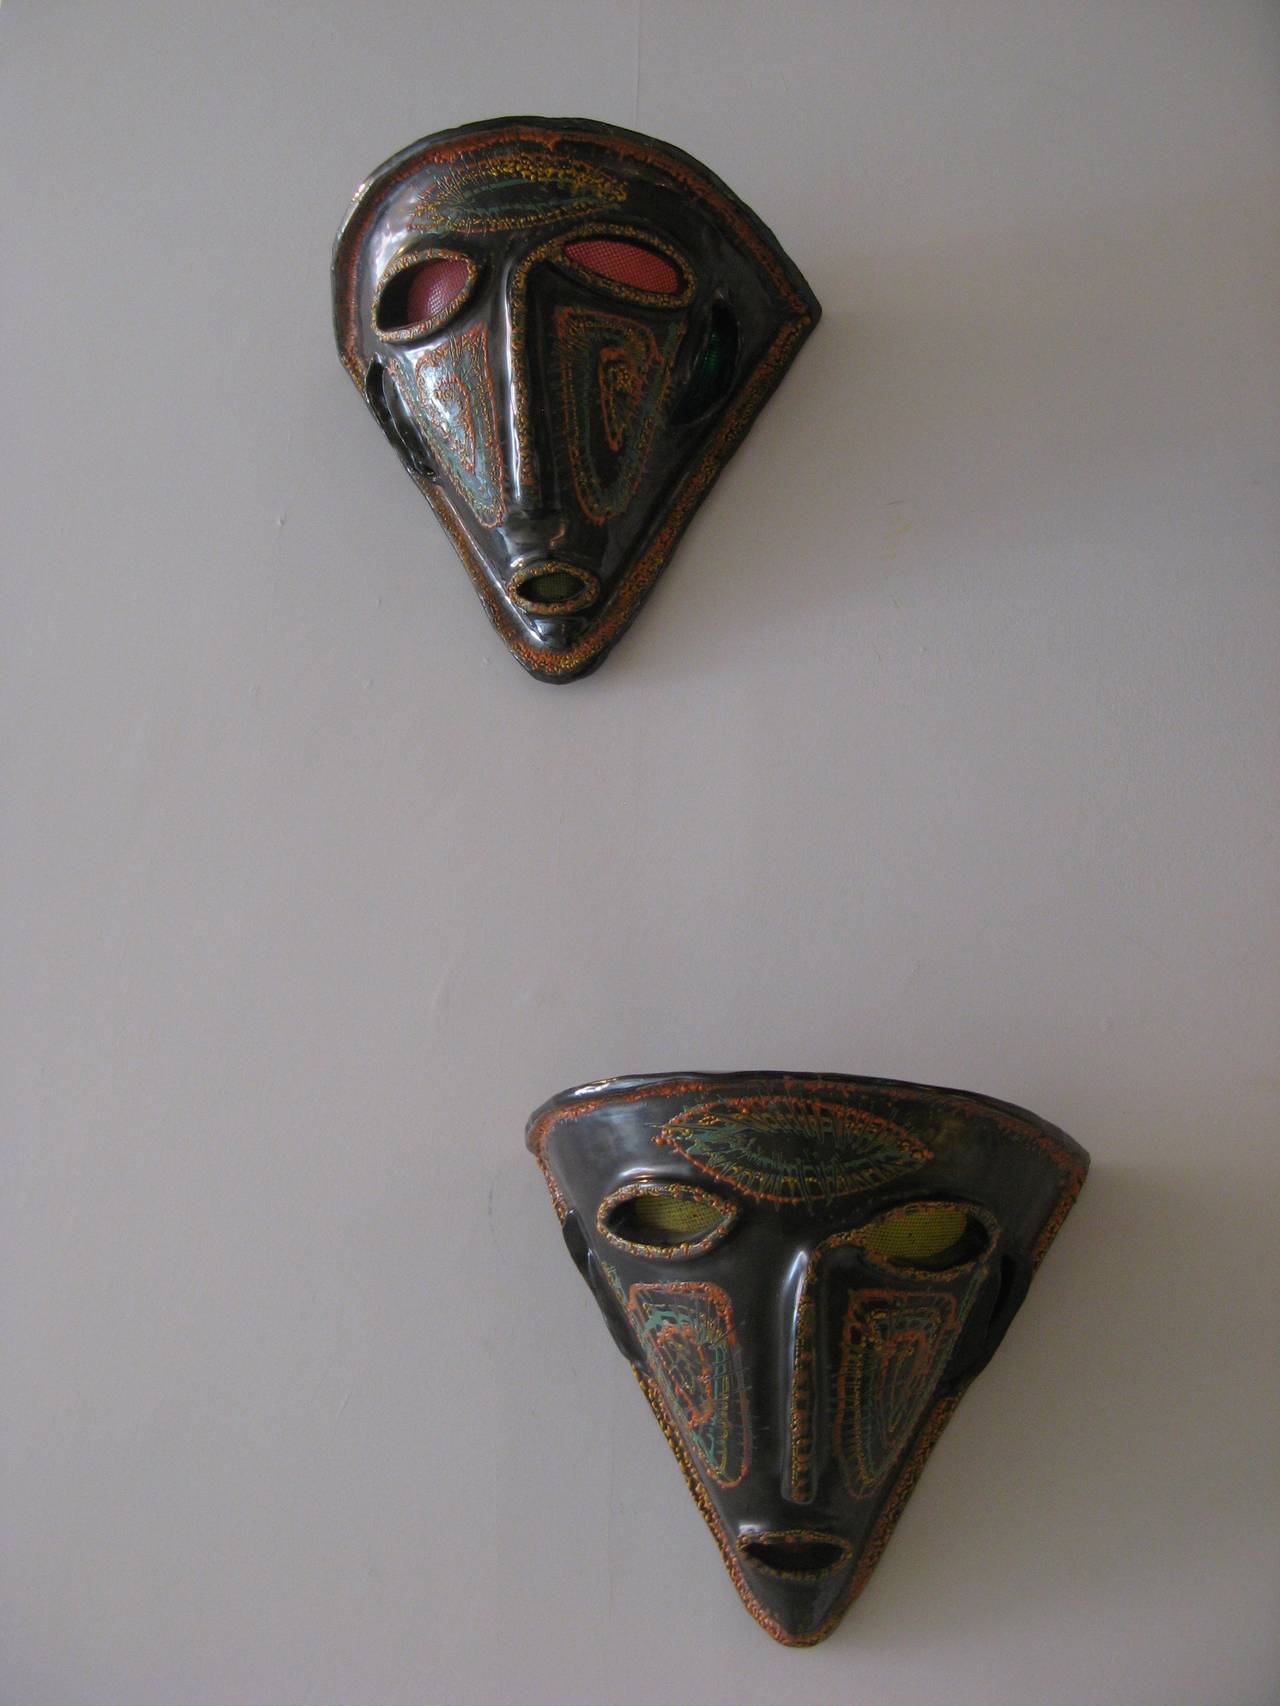 Pair of "Mask" sconces in black glazed ceramic vividly painted in polychrome with colorful translucent shades by Accolay, France, circa 1960.
Signed and numbered on the interior.